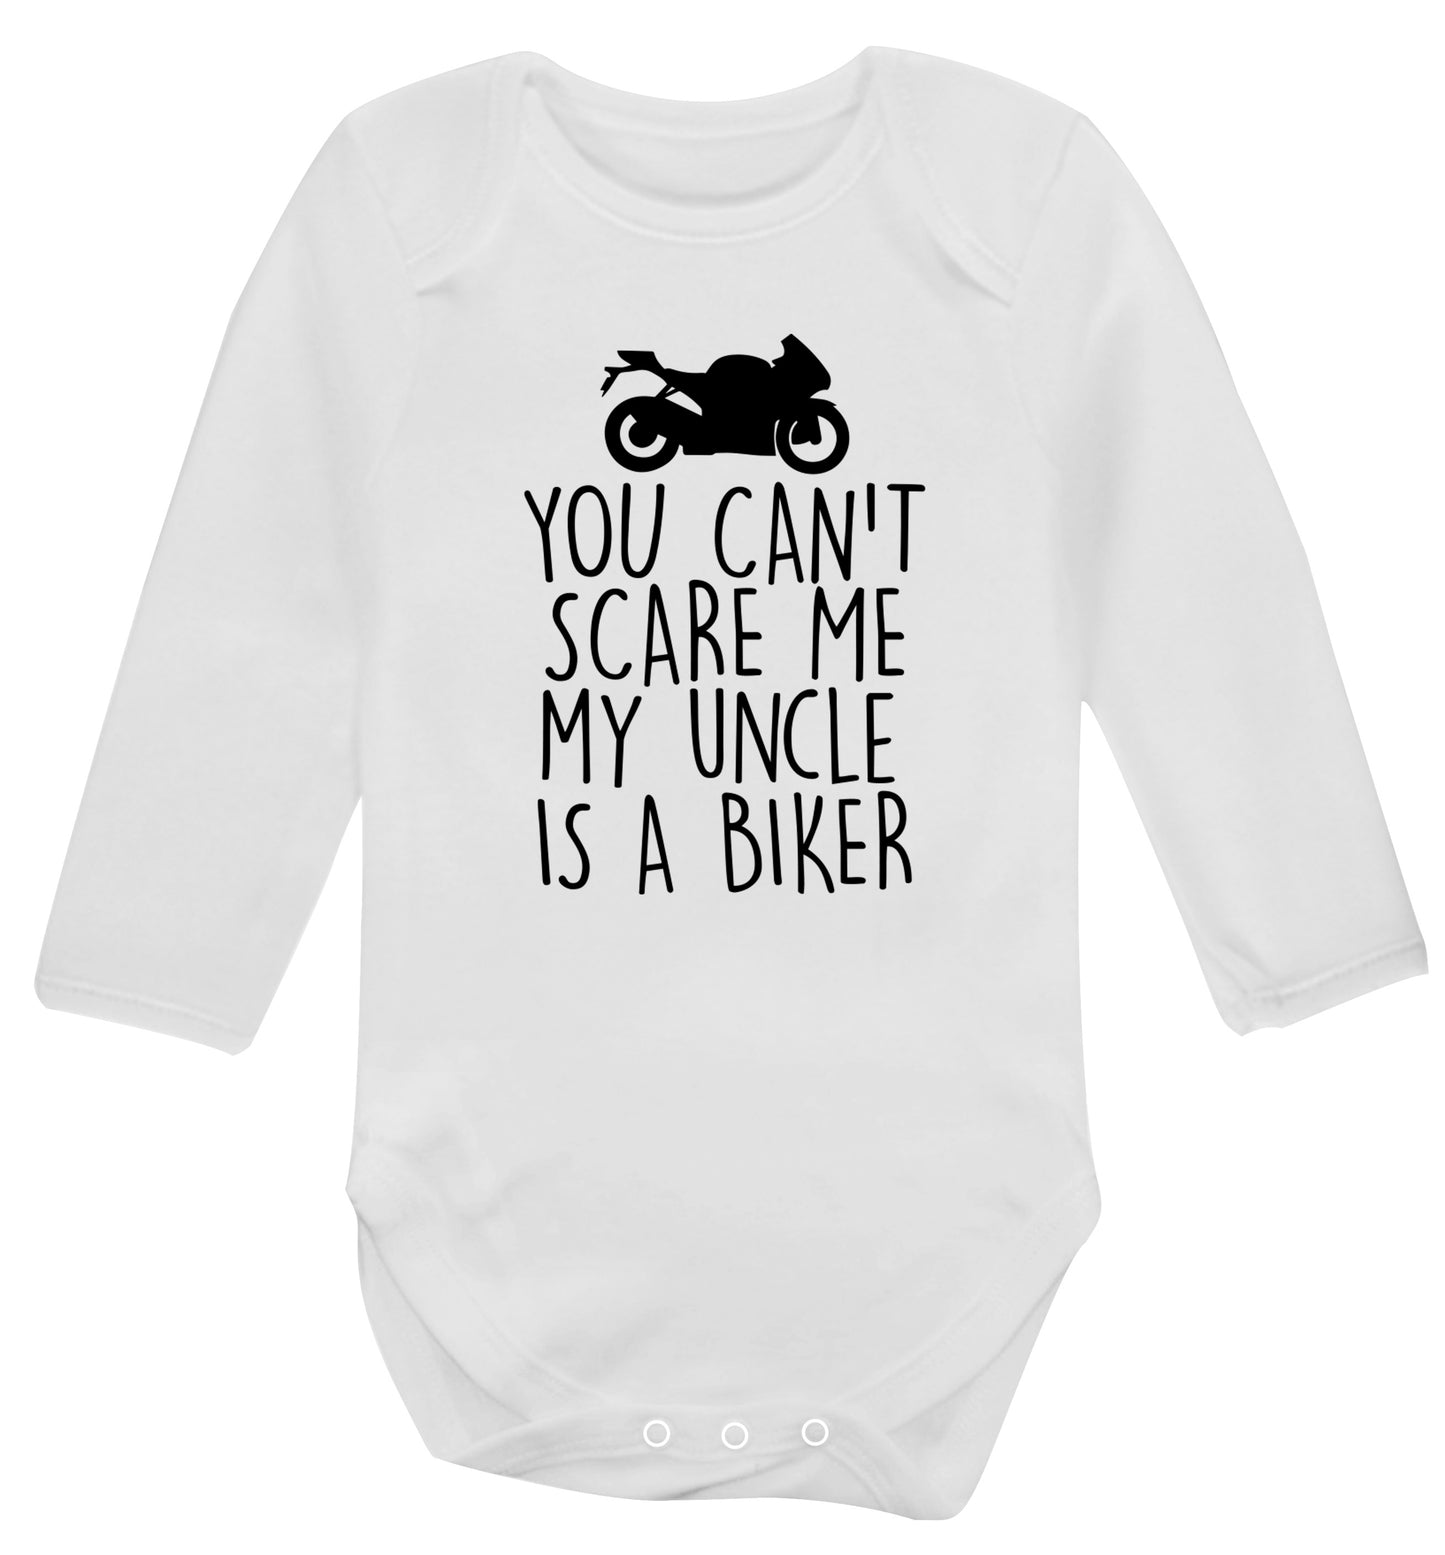 You can't scare me my uncle is a biker Baby Vest long sleeved white 6-12 months